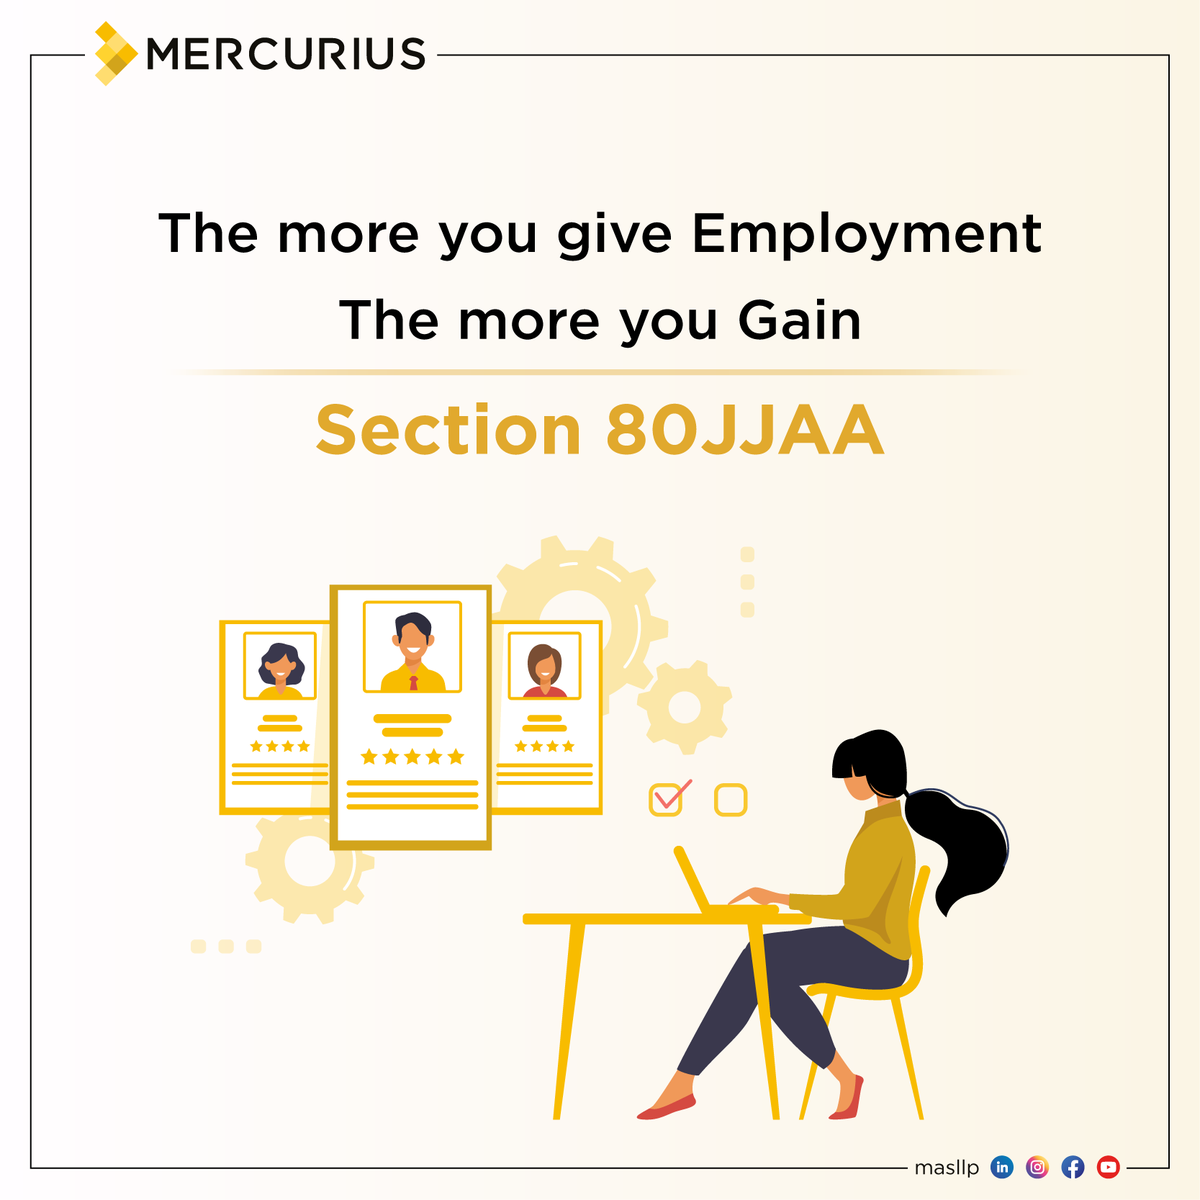 Unlock tax benefits while boosting employment with Section 80JJAA!!

Here's what you need to know: masllp.com/the-more-you-g…

#Taxdeductions #Employmentopportunities #Mercurius #section80JJAA #taxbenefits #taxes #TaxEfficiency #companytaxes #gainmore